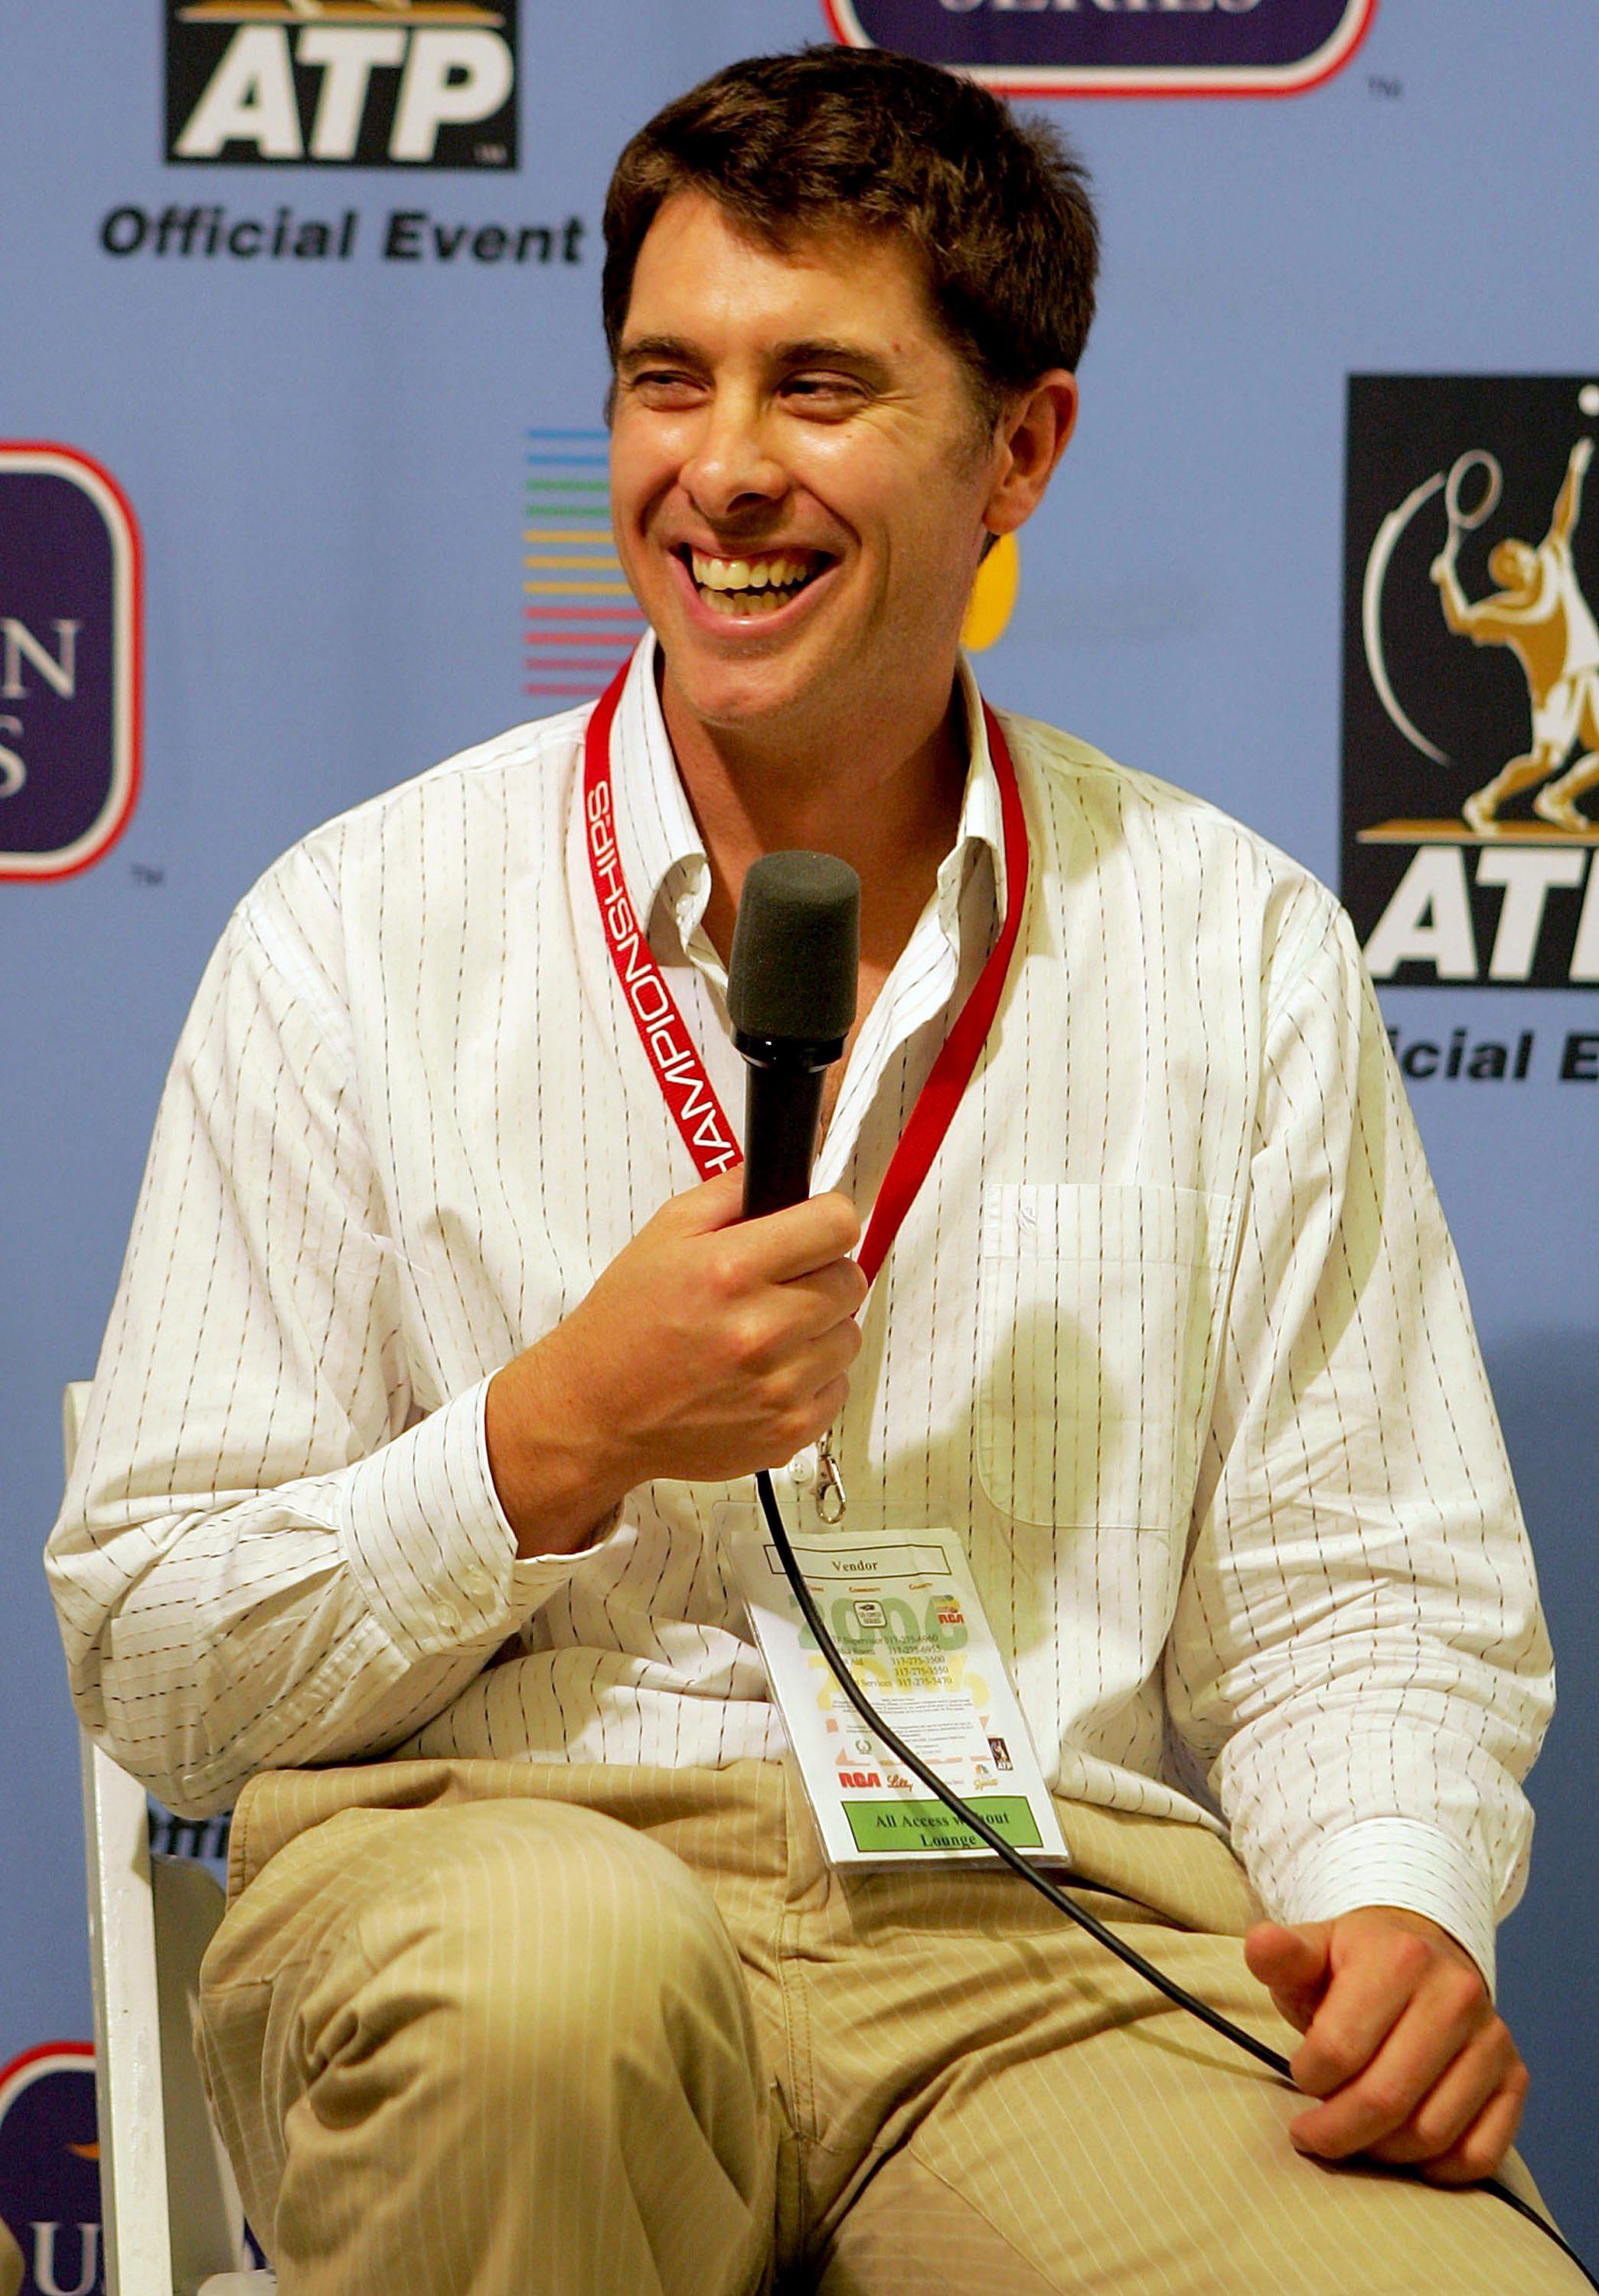 Paul Hawkins, the inventor of Hawk-Eye Officating, fields questions from the media after a demonstration of the instant replay system used throughout the US Open Series.